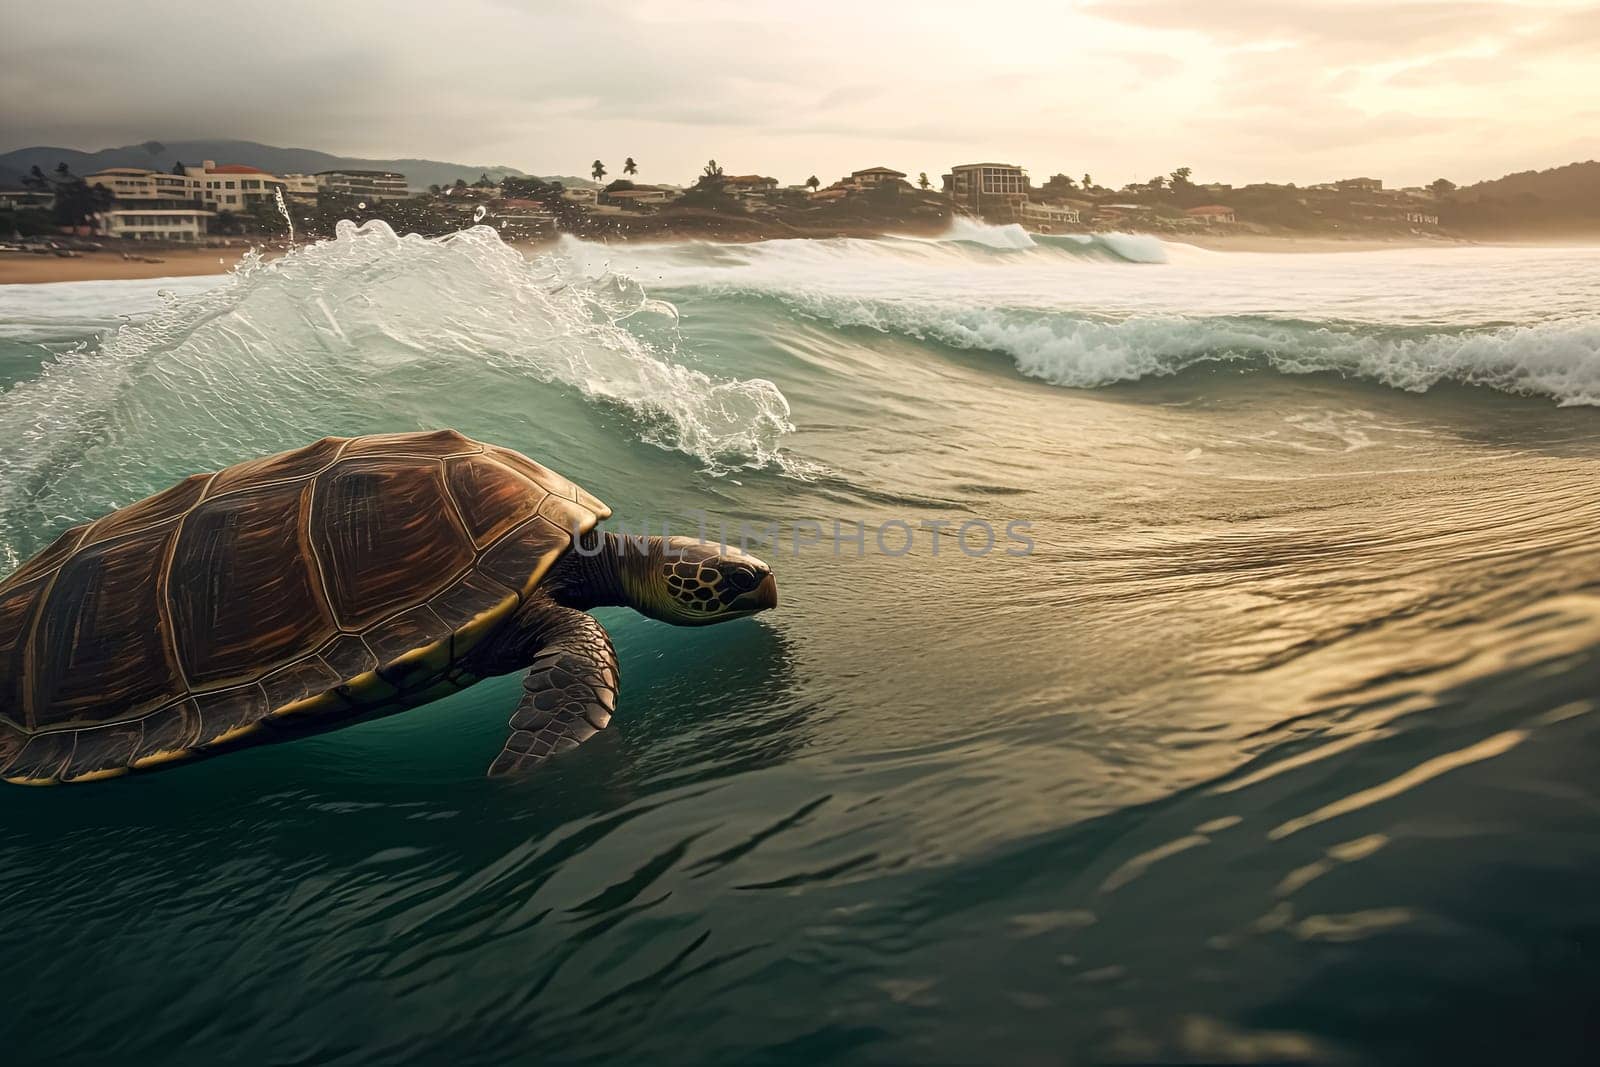 A turtle is swimming in the ocean. The water is green and the turtle is looking up at the camera